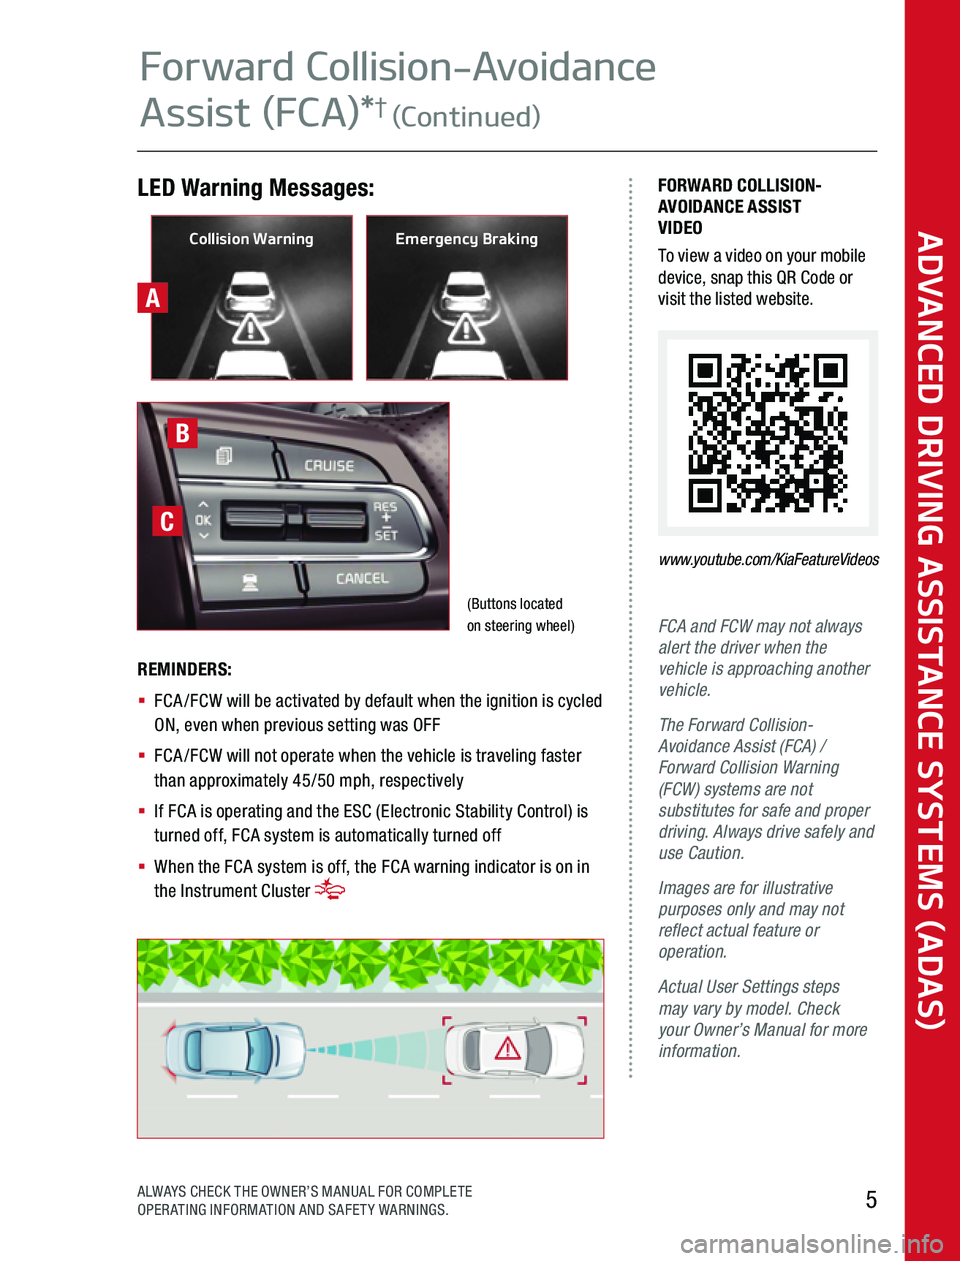 KIA SEDONA 2020  Advanced Driving Assistance System A
LED Warning Messages:FORWARD COLLISION-AVOIDANCE ASSIST VIDEOTo view a video on your mobile device, snap this QR Code or visit the listed website 
www.youtube.com/KiaFeatureVideos
FCA and FCW may no